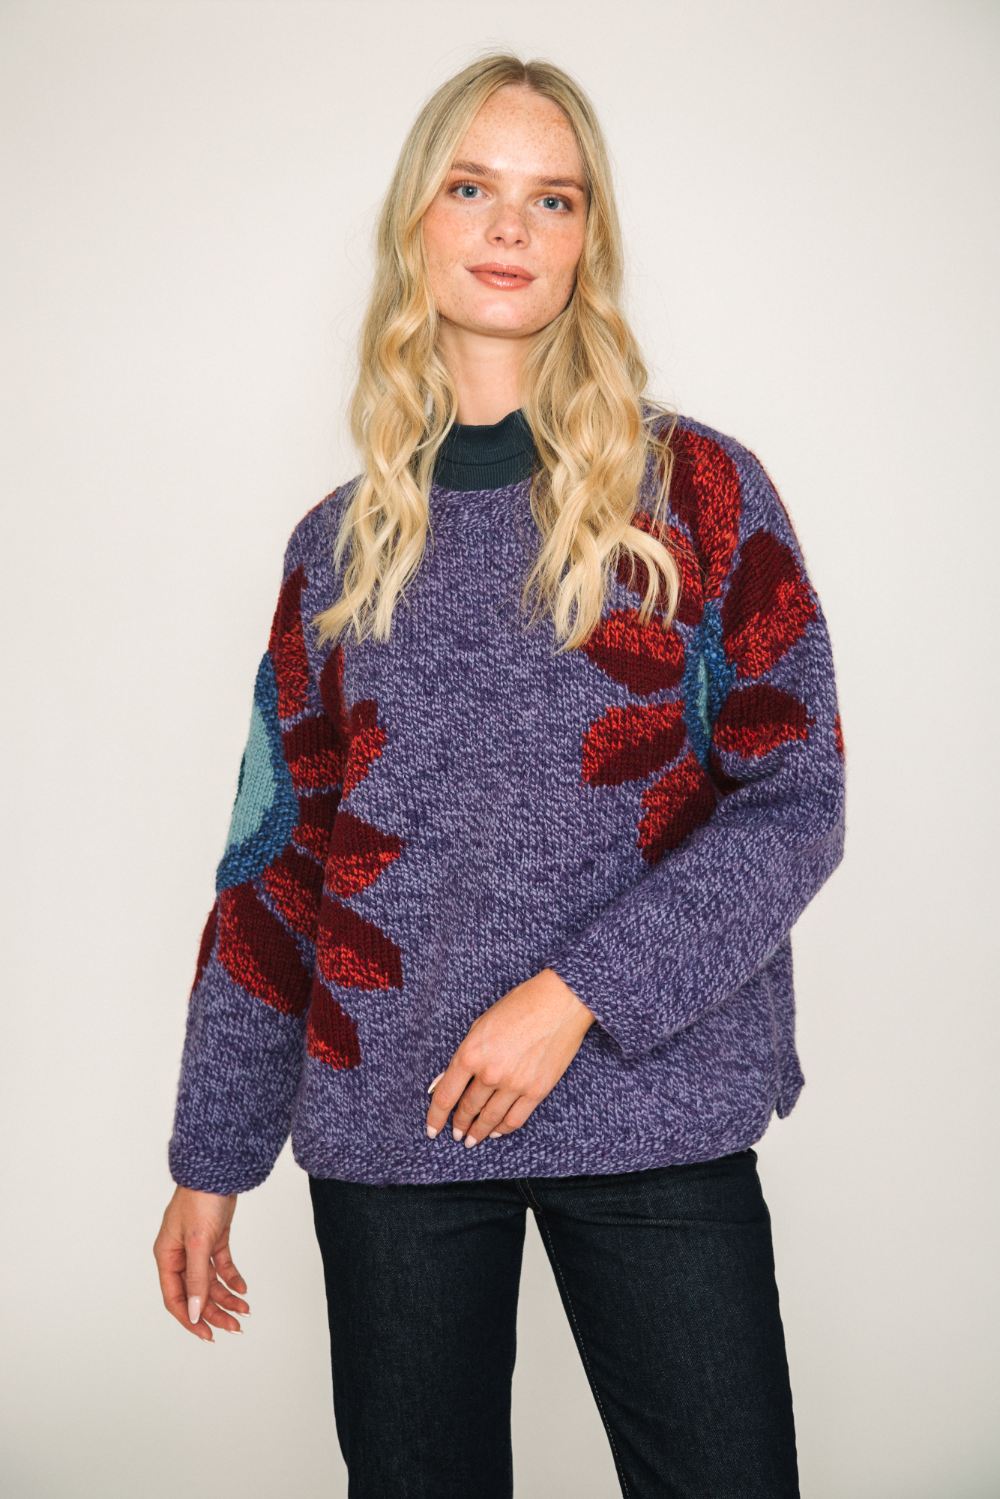 amano sunflower wool jumper in purple with red flowers women front